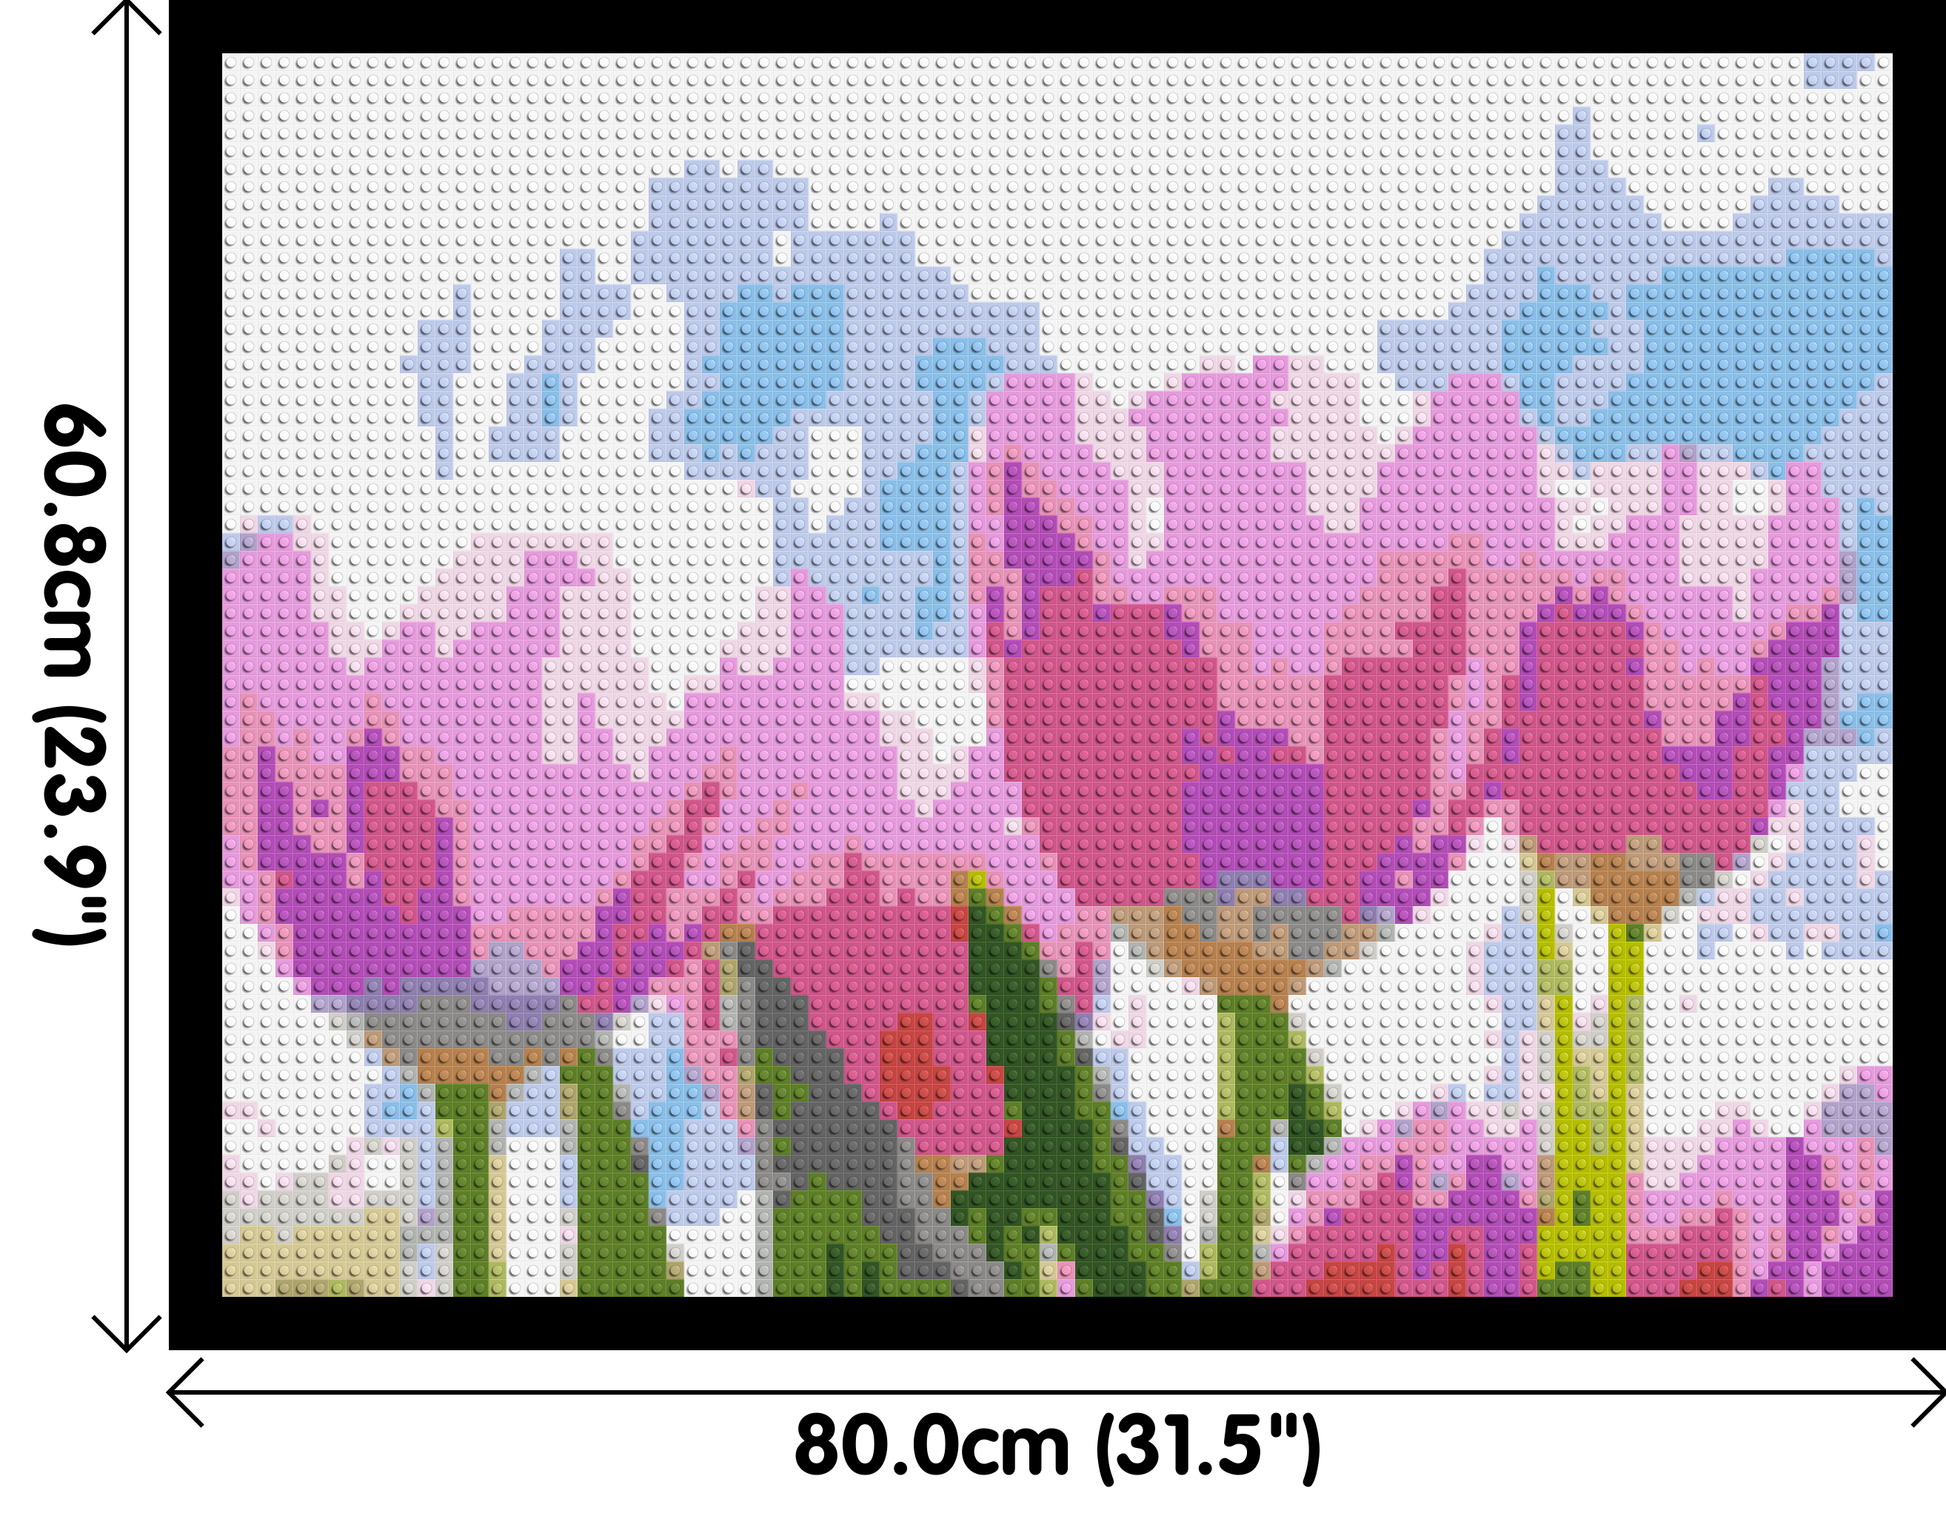 Pink Tulips - Brick Art Mosaic Kit 4x3 dimensions with frame